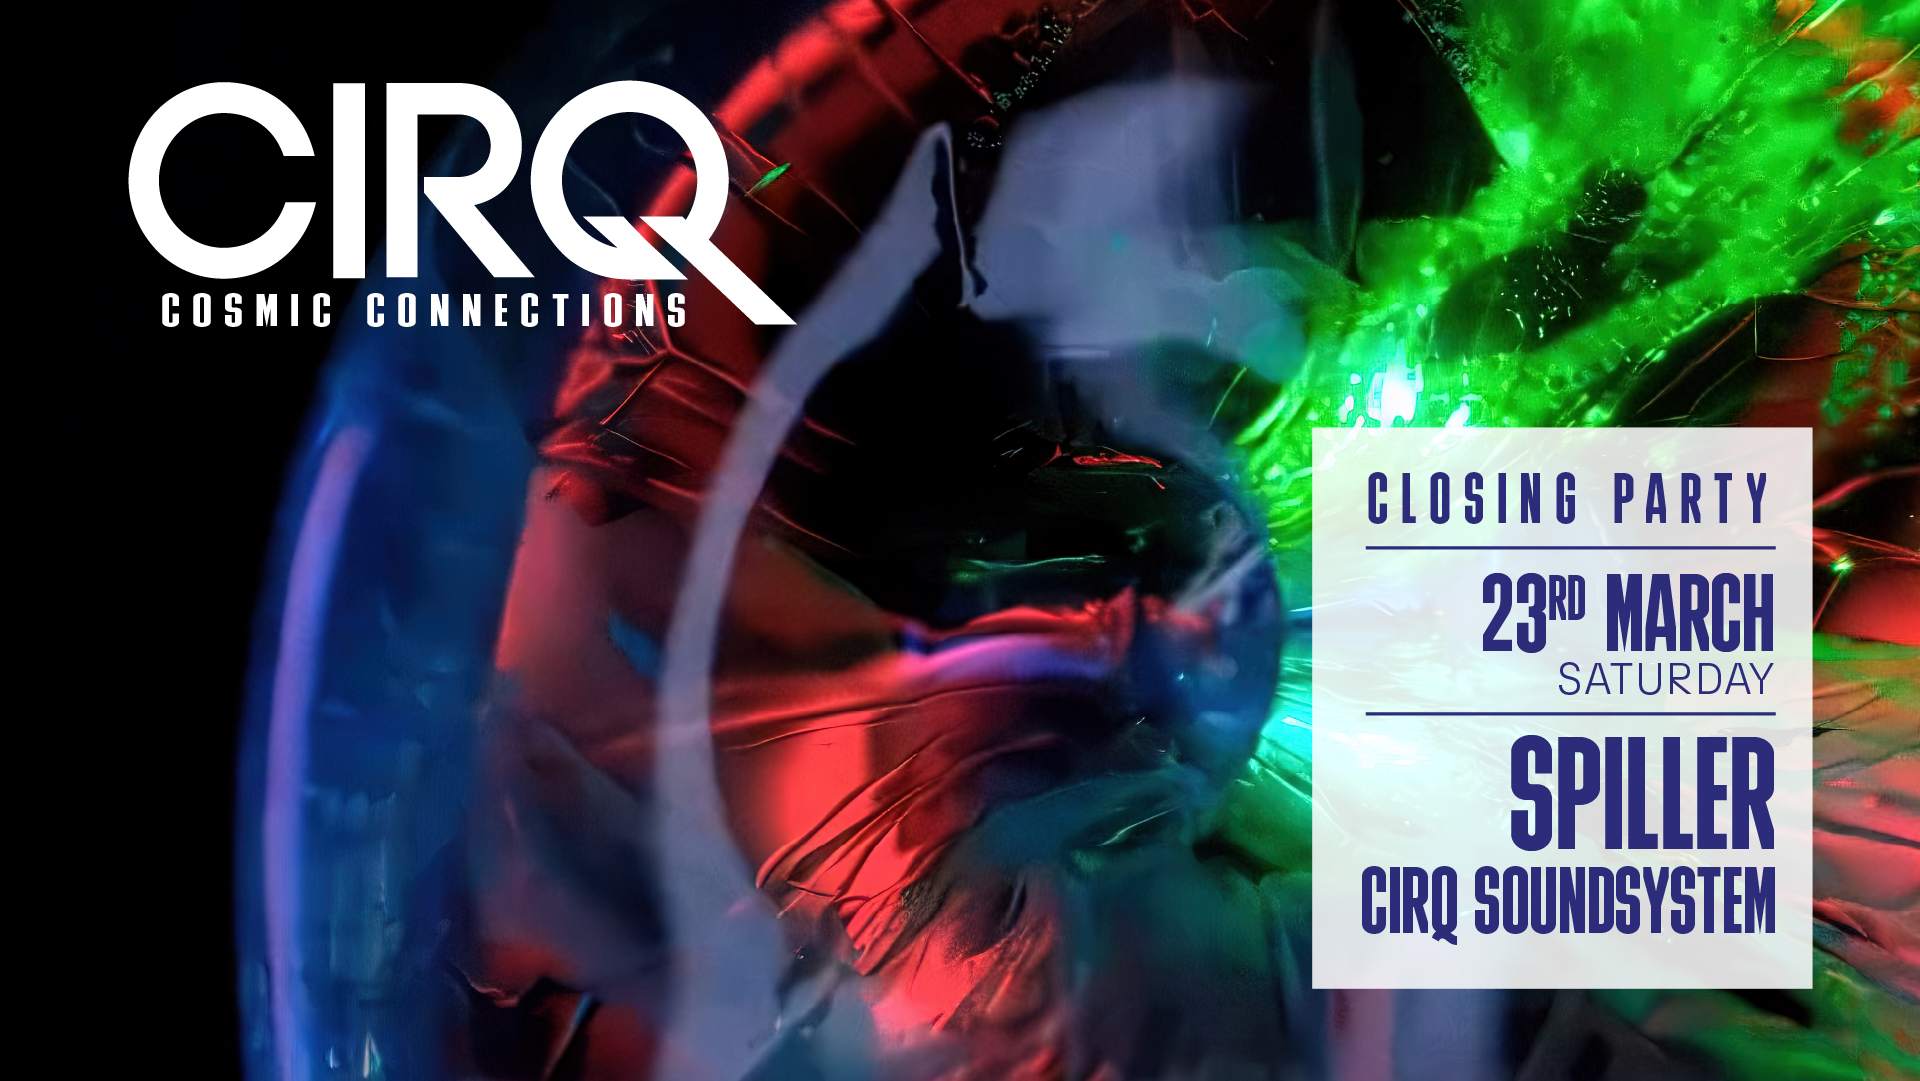 CirQ Closing Party with Spiller (Defected), CirQ Soundsystem - フライヤー表